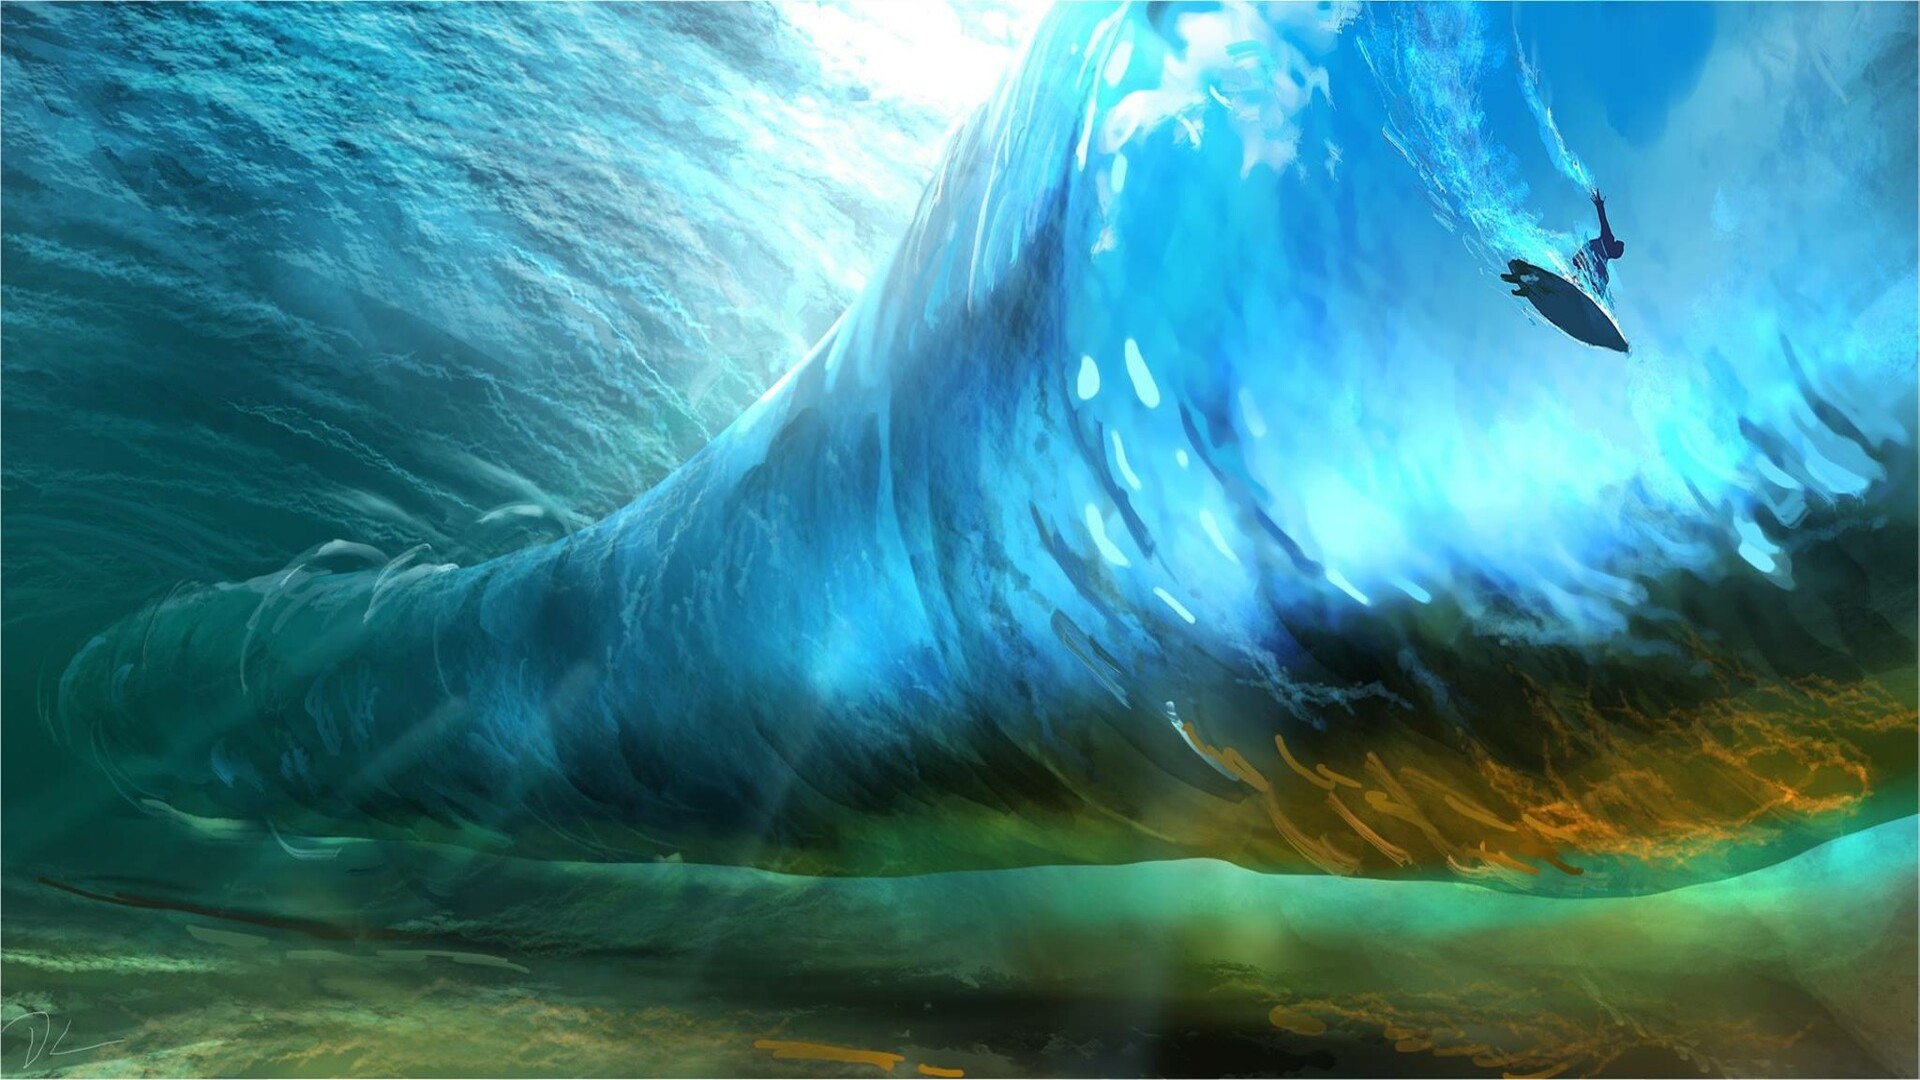 General 1920x1080 digital art artwork landscape water underwater surfers surfing waves lights blue green environment concept art digital painting drawing tropical tropical water nature sea surreal illustration sun rays